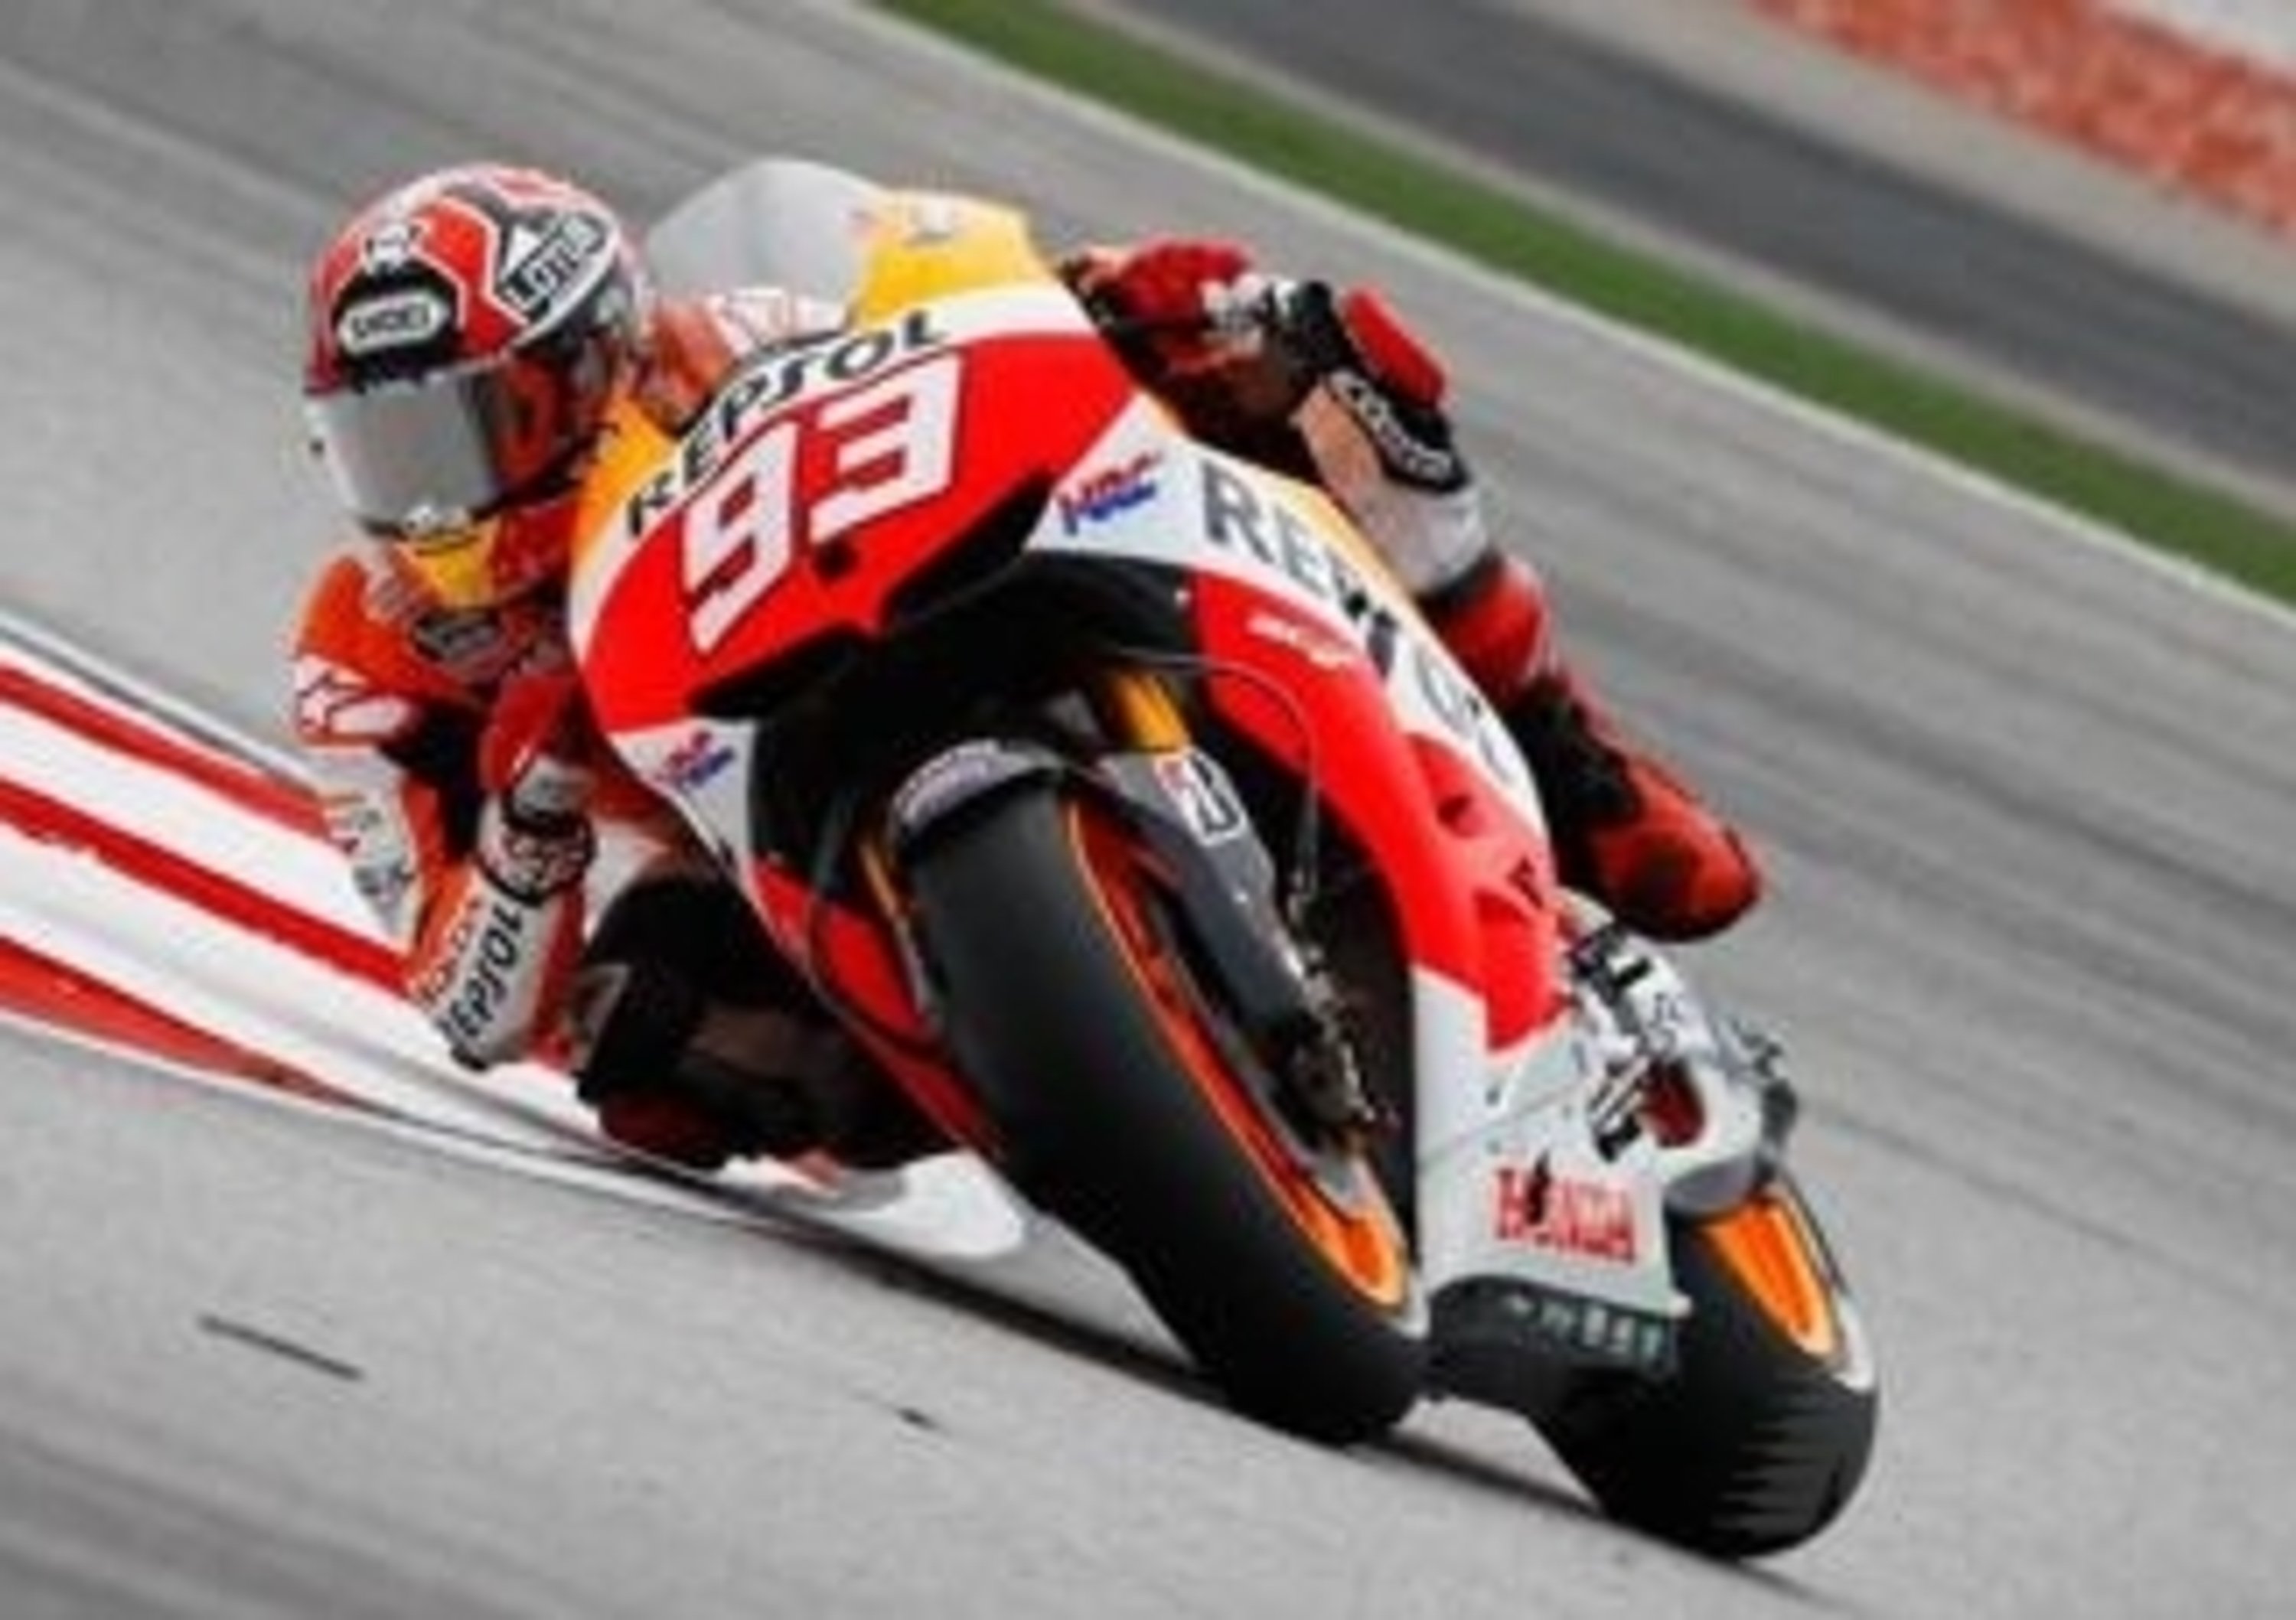 Marquez in poleposition a Sepang, Rossi secondo